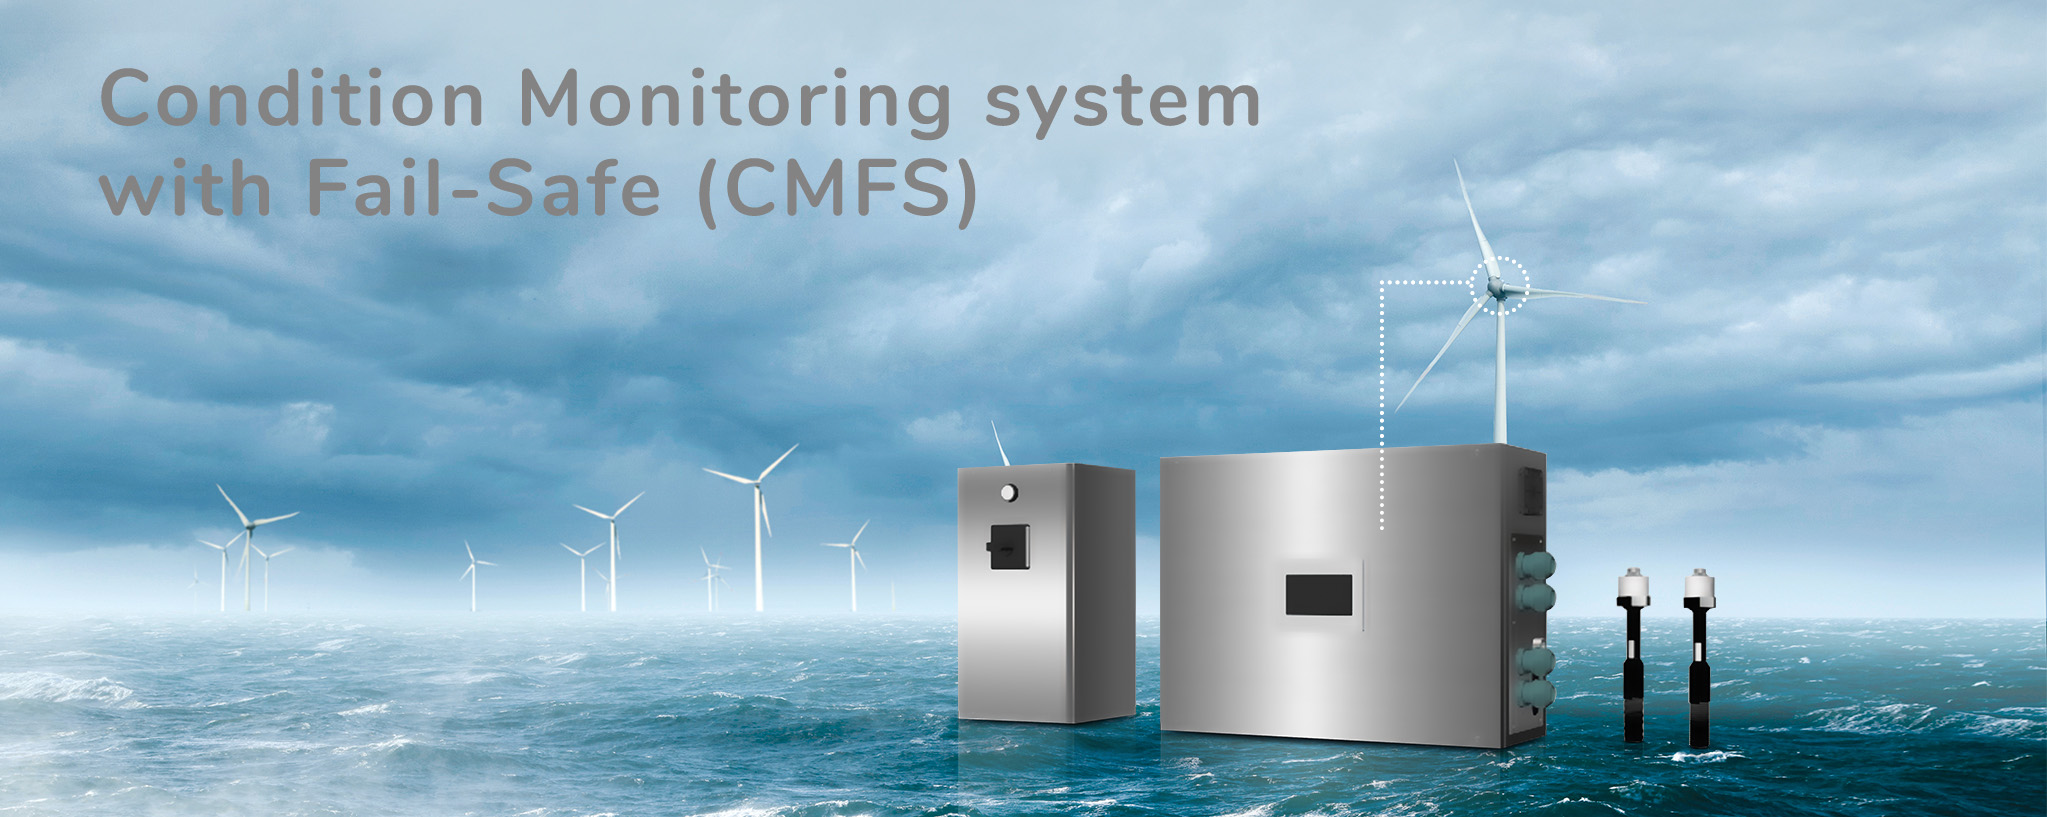 Condition Monitoring system with Fail-Safe(CMFS) Wind Energy Hamburg 2022 に出展いたします！